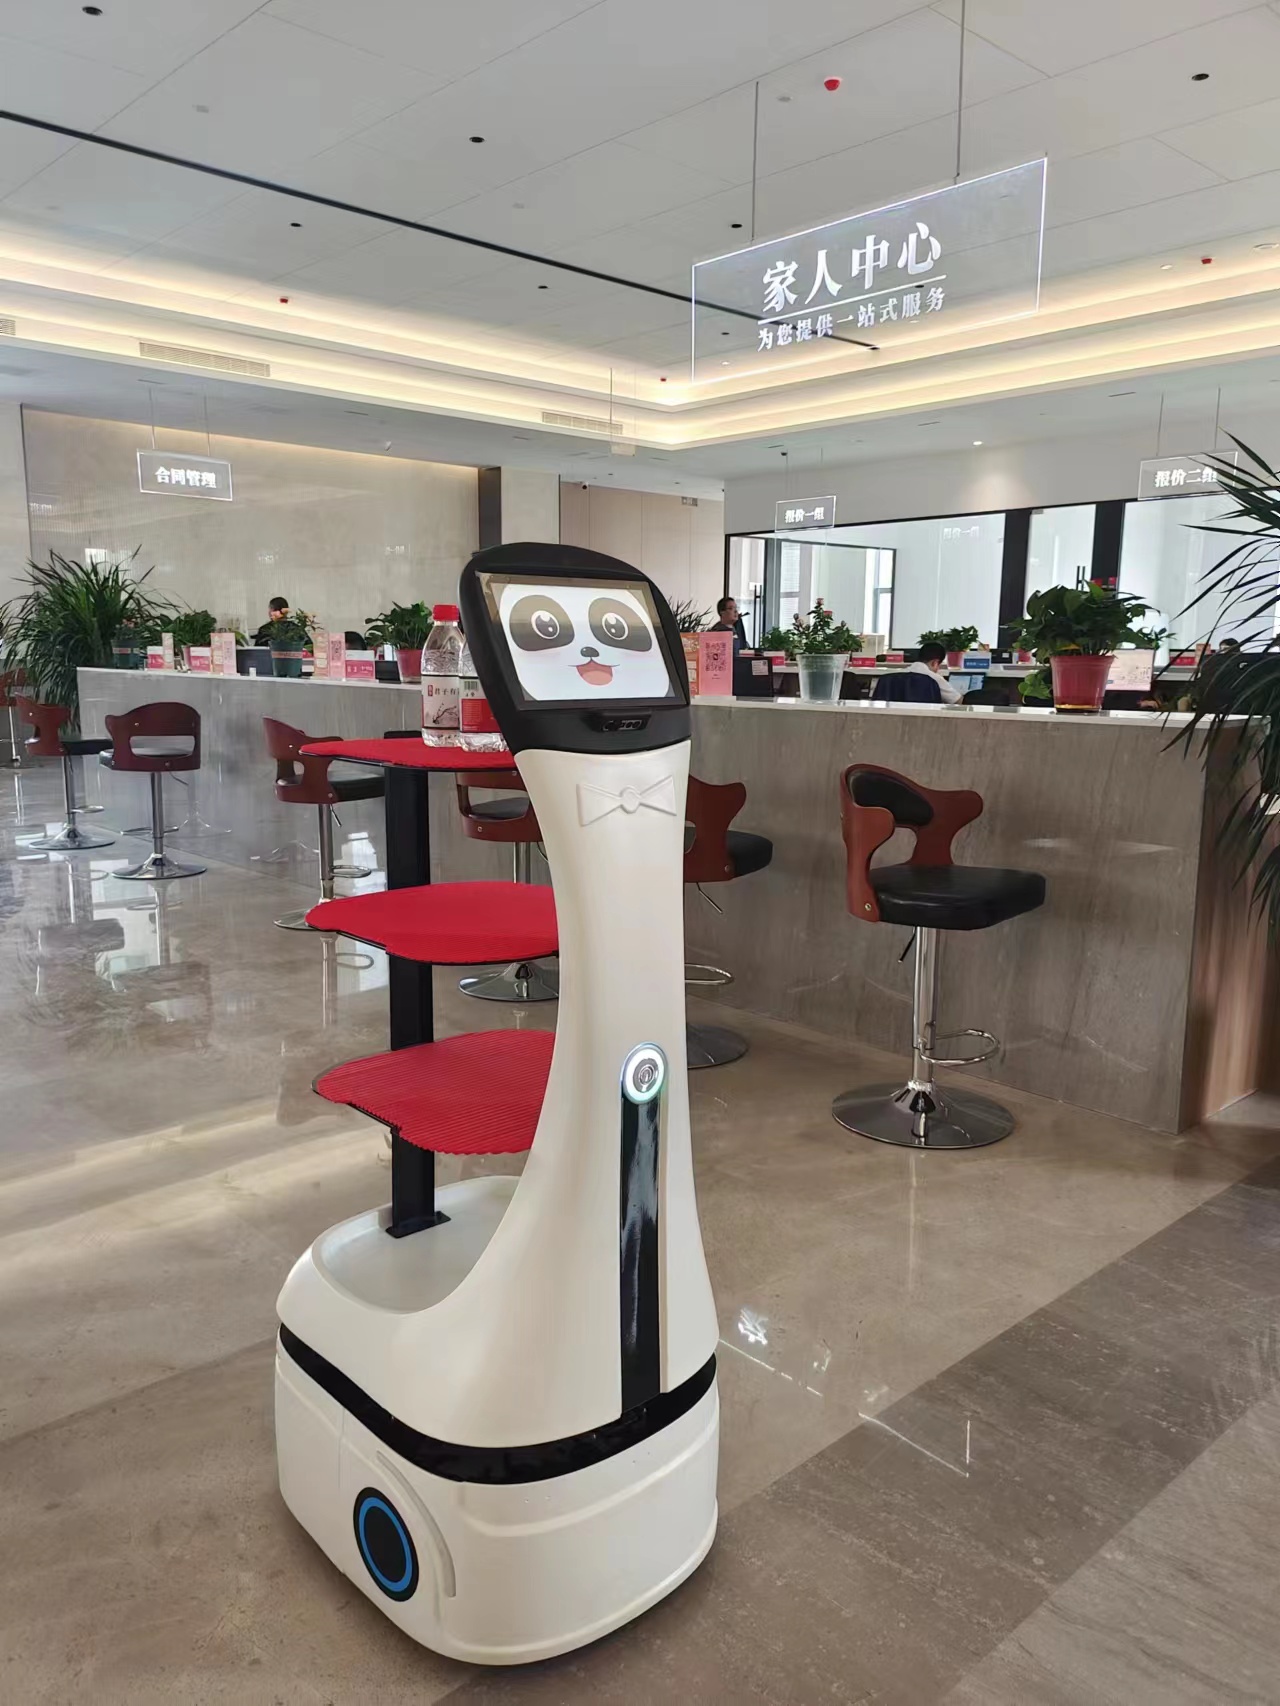 The panda delivery robot turns into a mobile “water bar”